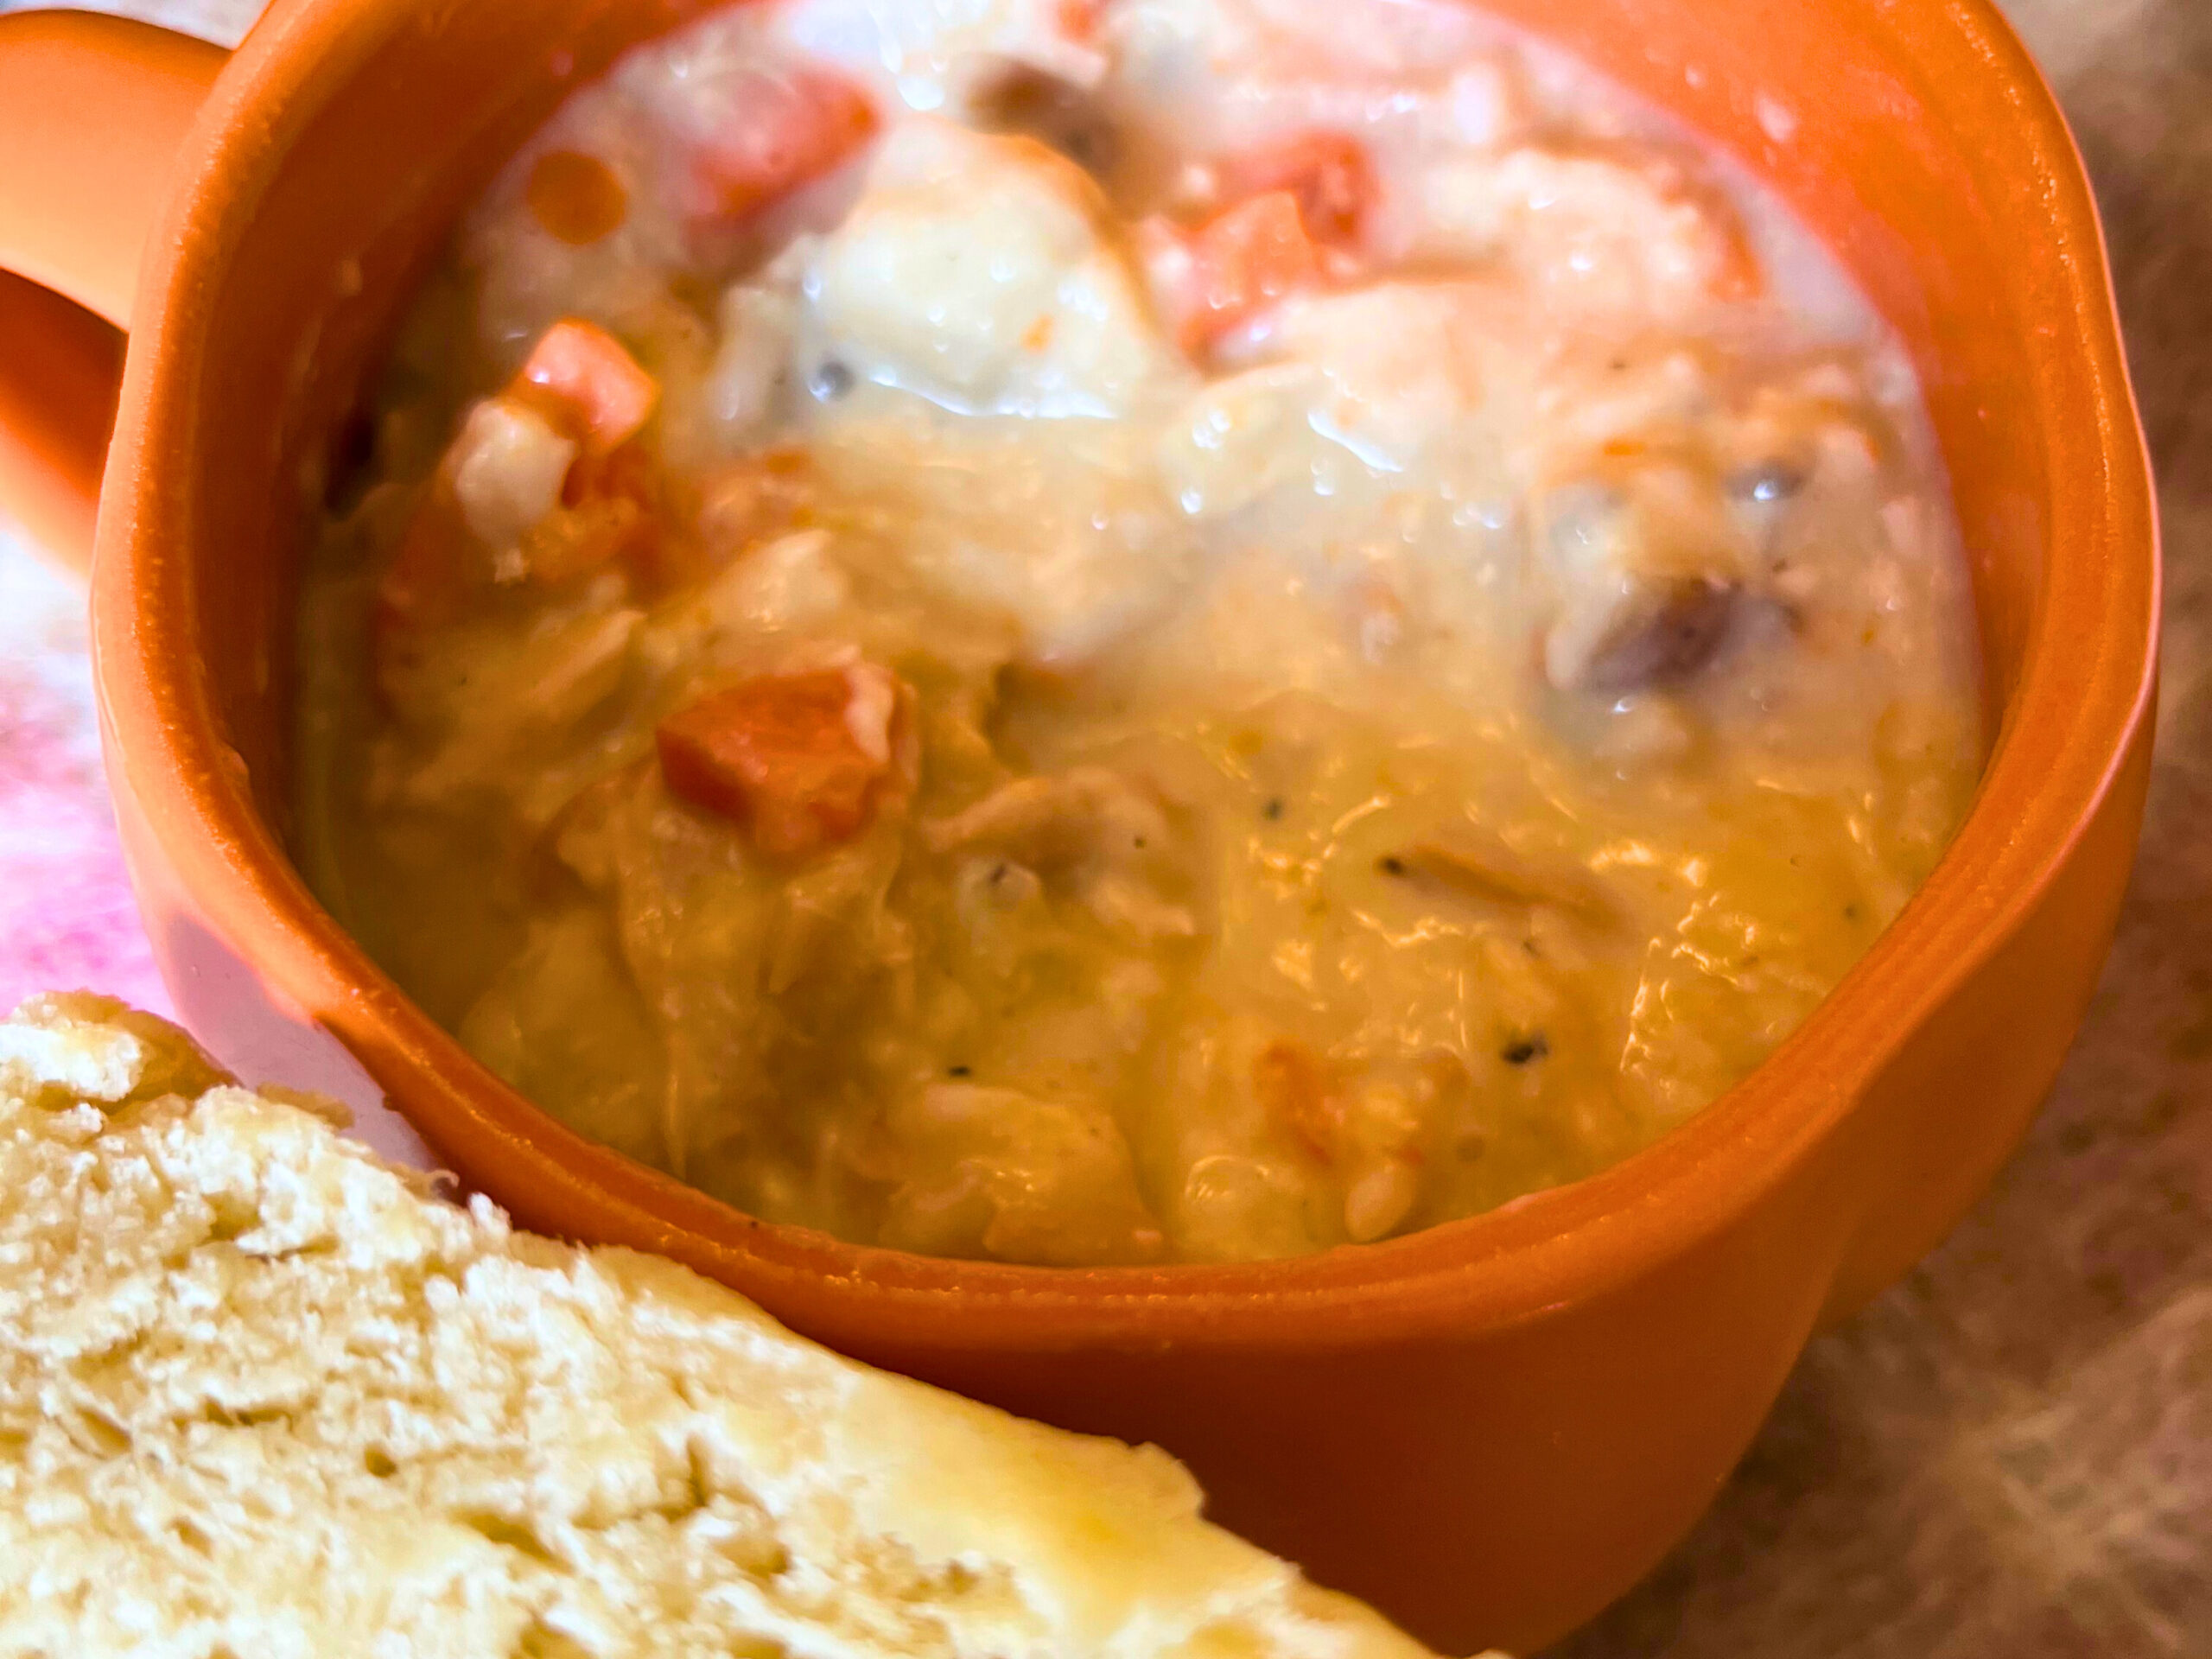 A bowl of creamy turkey and wild rice soup in a pumpkin mug. A sliced bun in the foreground